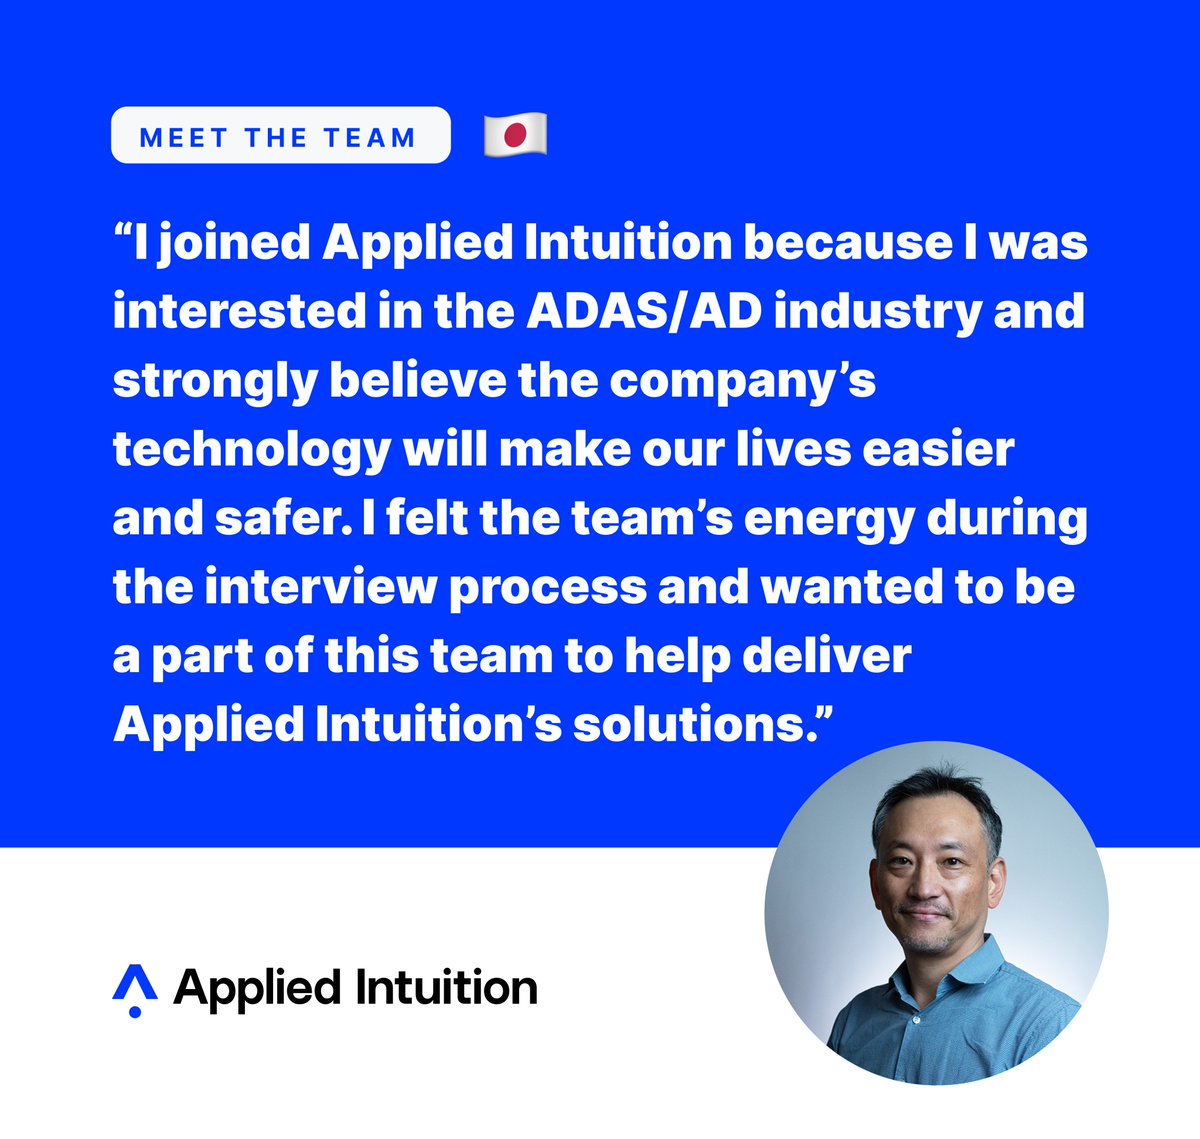 Time for another Meet the Team highlight! We’re celebrating the exceptional talent and dedication of our team across our global offices. Check out our current openings at appliedintuition.com/careers. #appliedintuition #meettheteam #adas